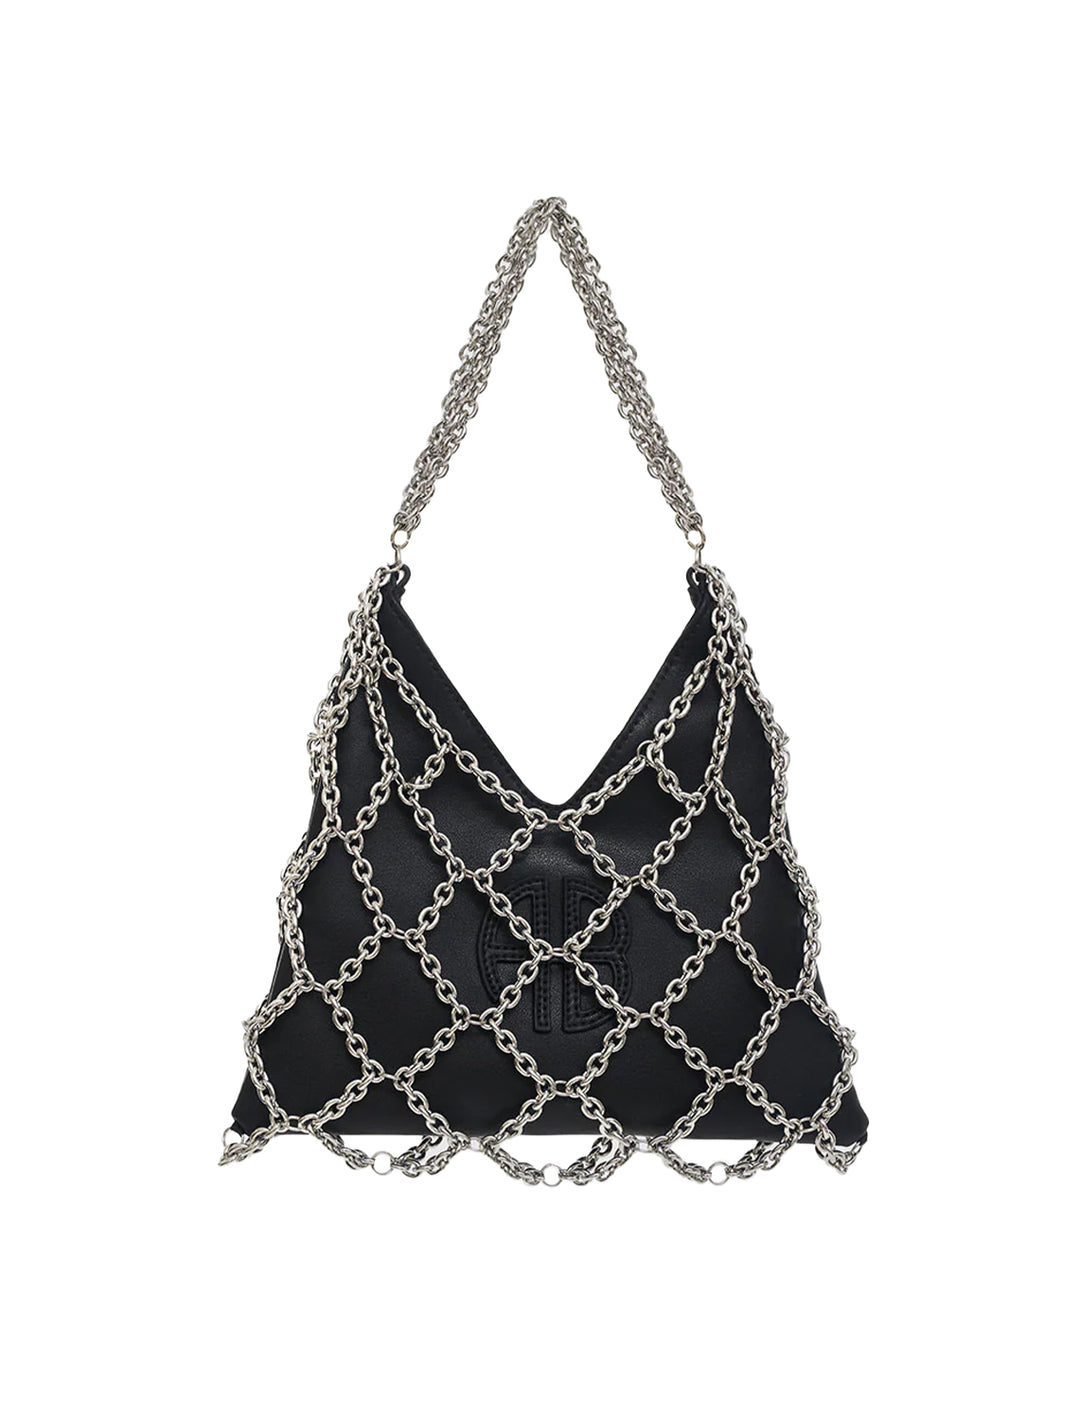 Front view of Anine Bing's mini gaia chain bag in black.